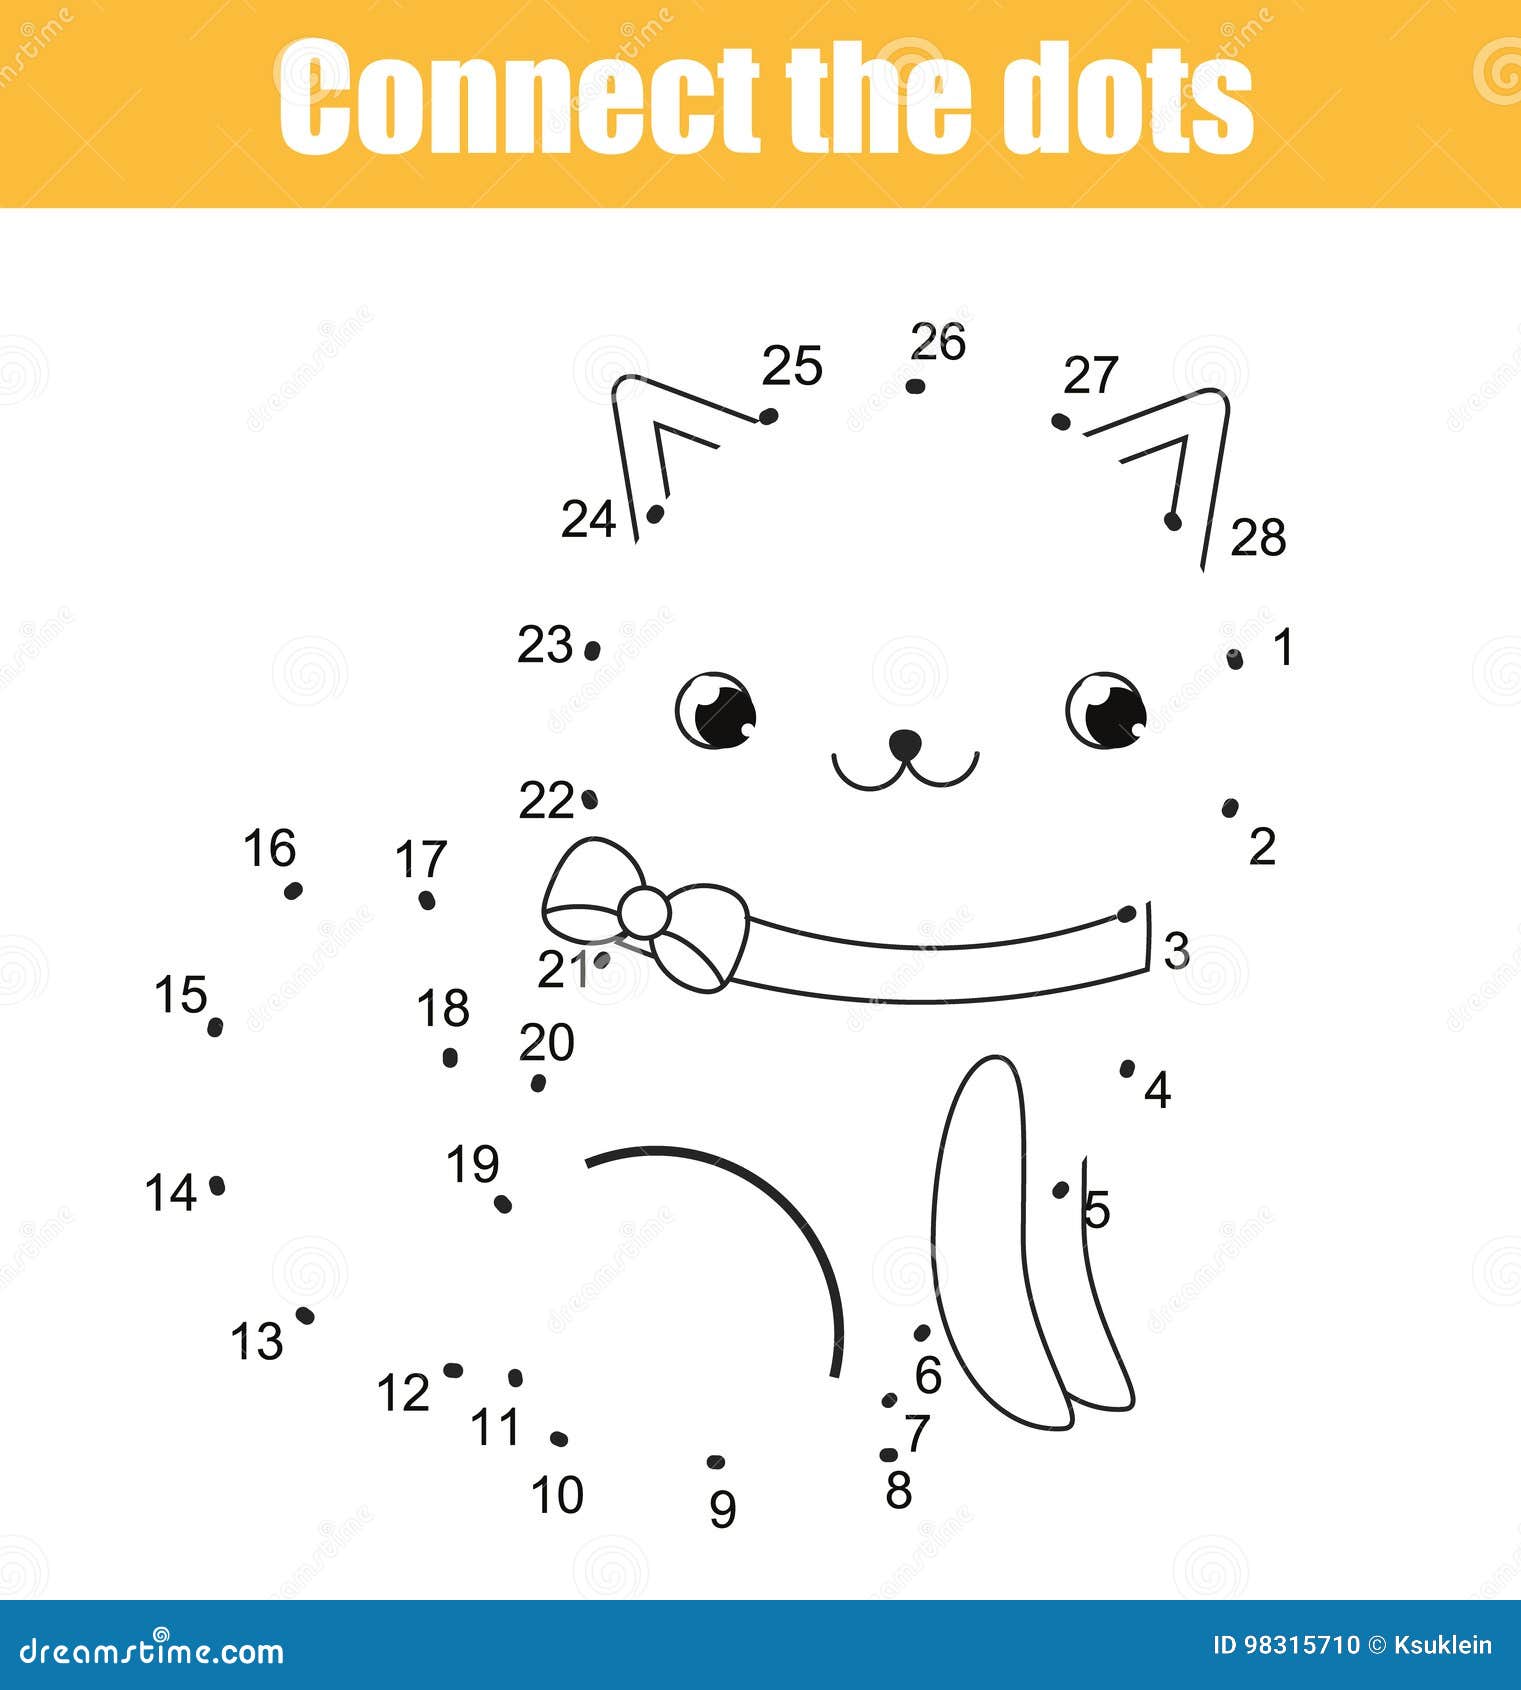 connect the dots by numbers children educational game. printable worksheet activity. animals theme, cat